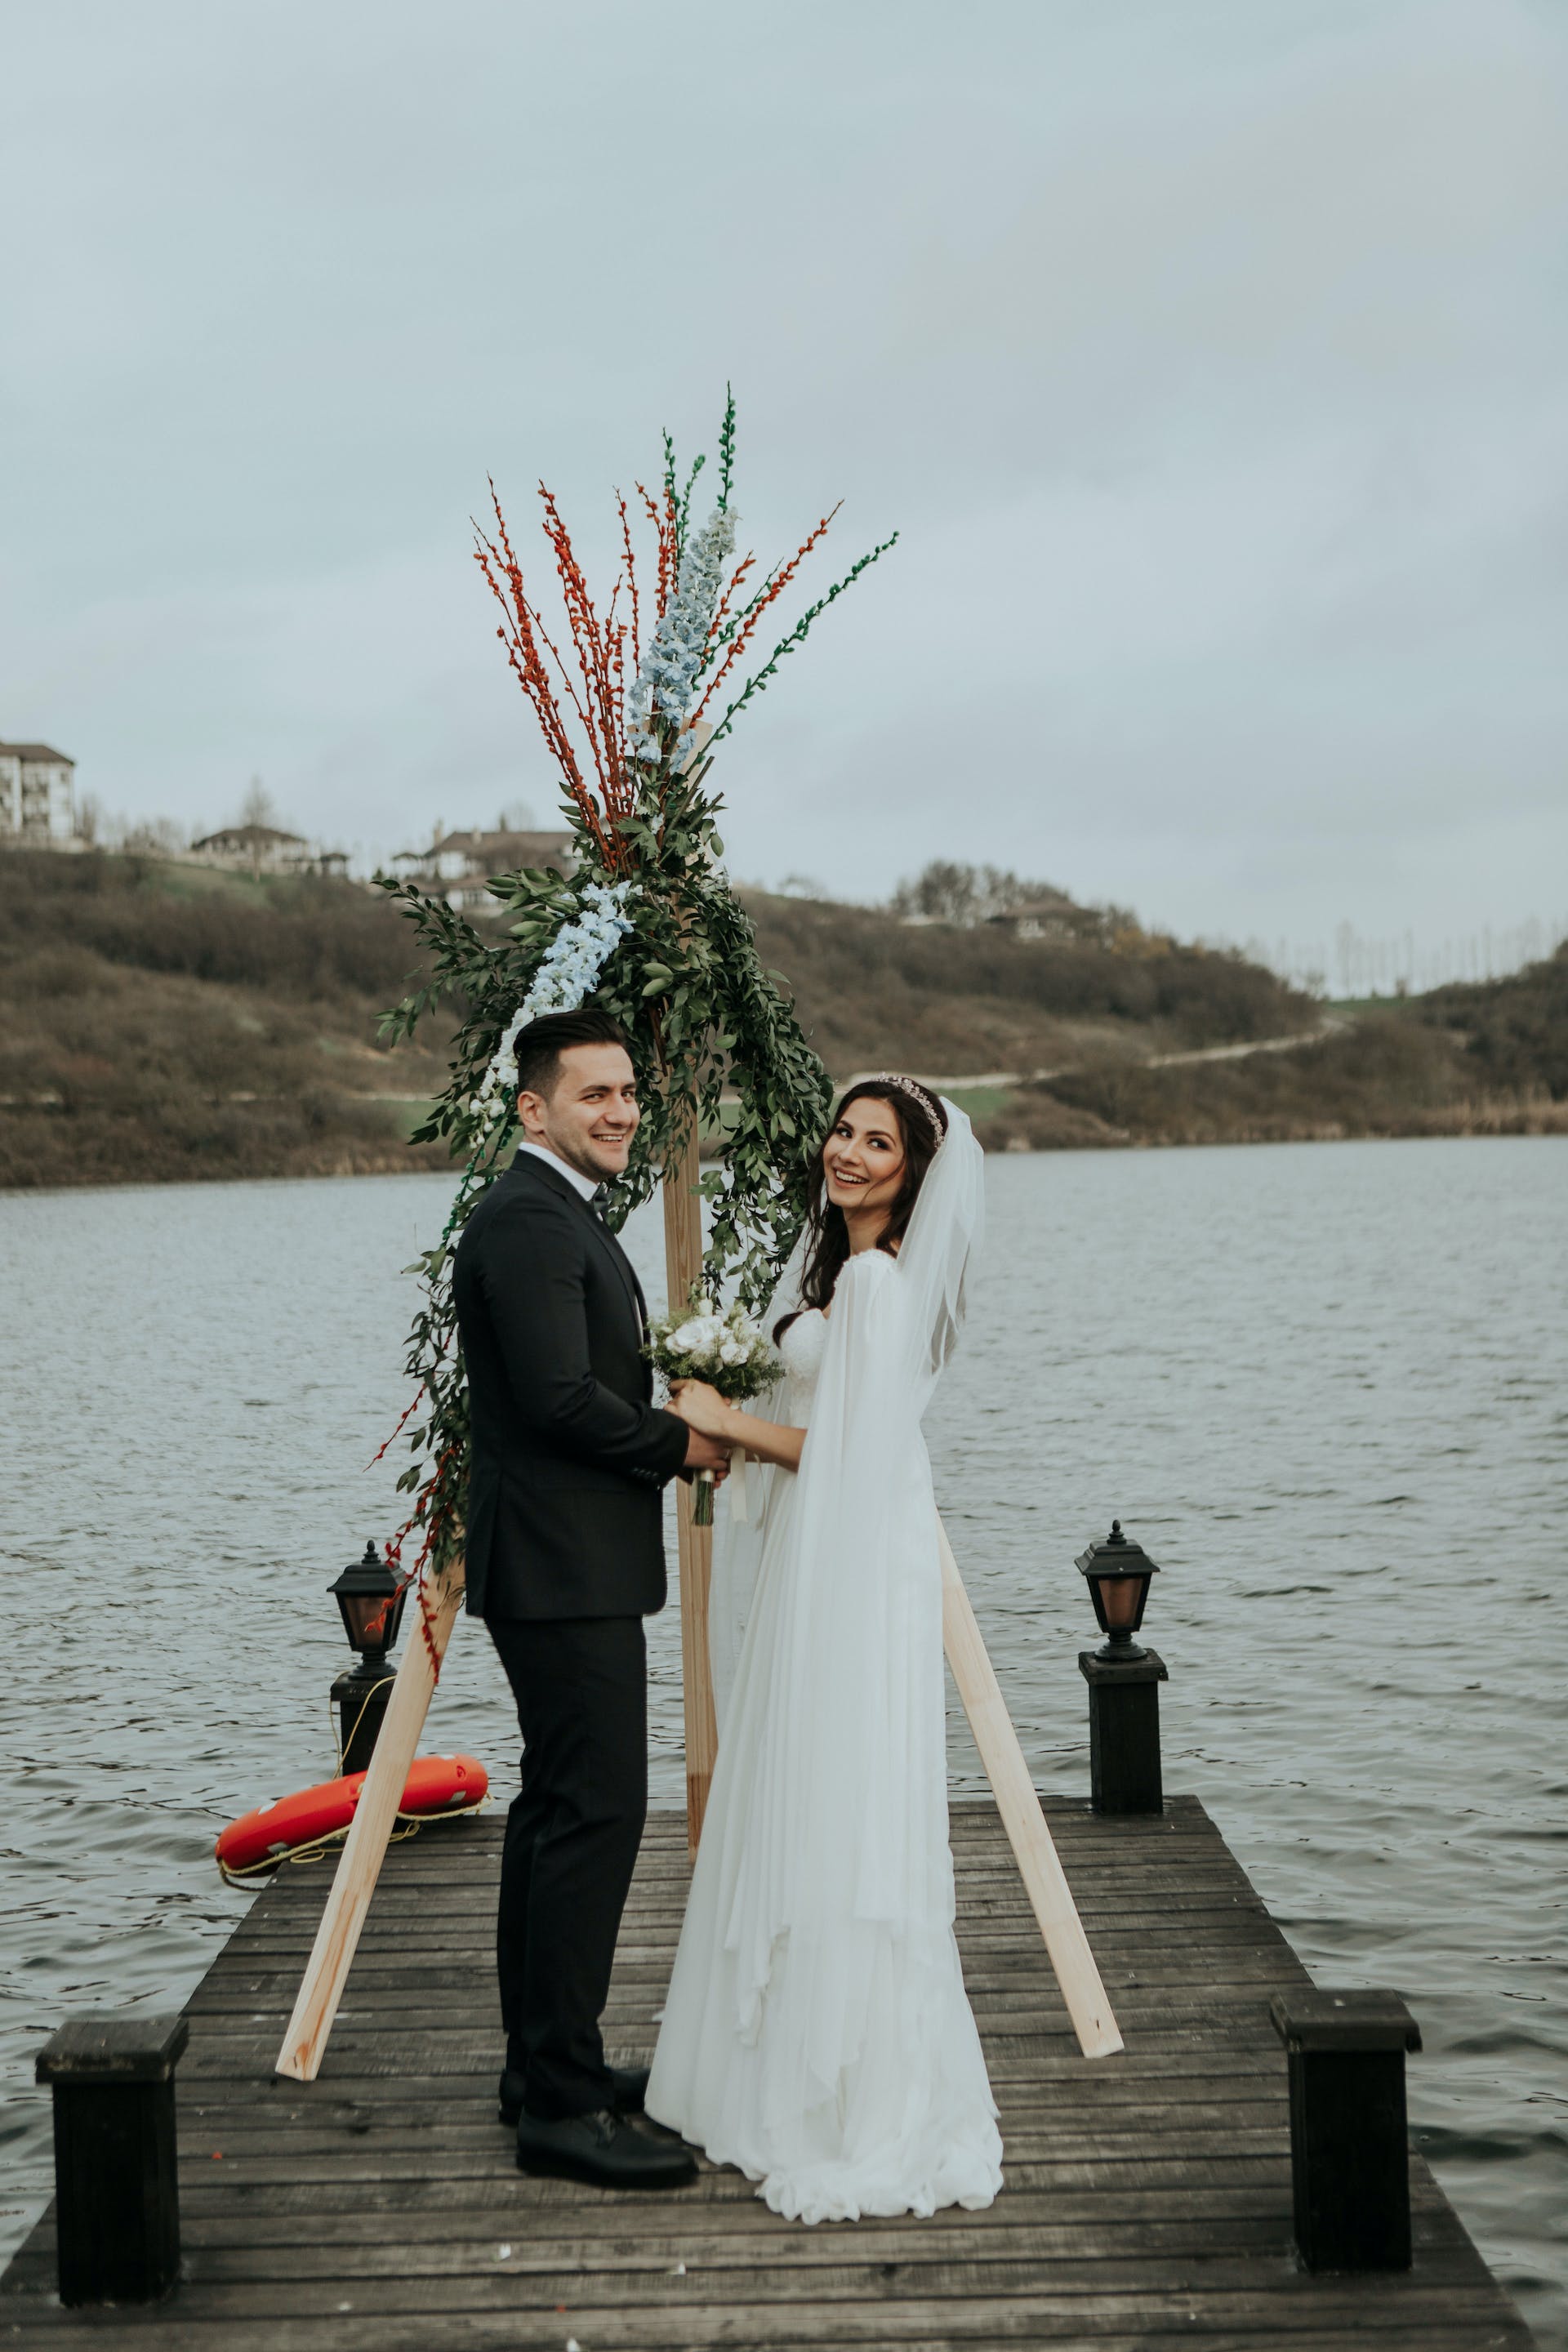 A bride and groom standing on a pier | Source: Pexels